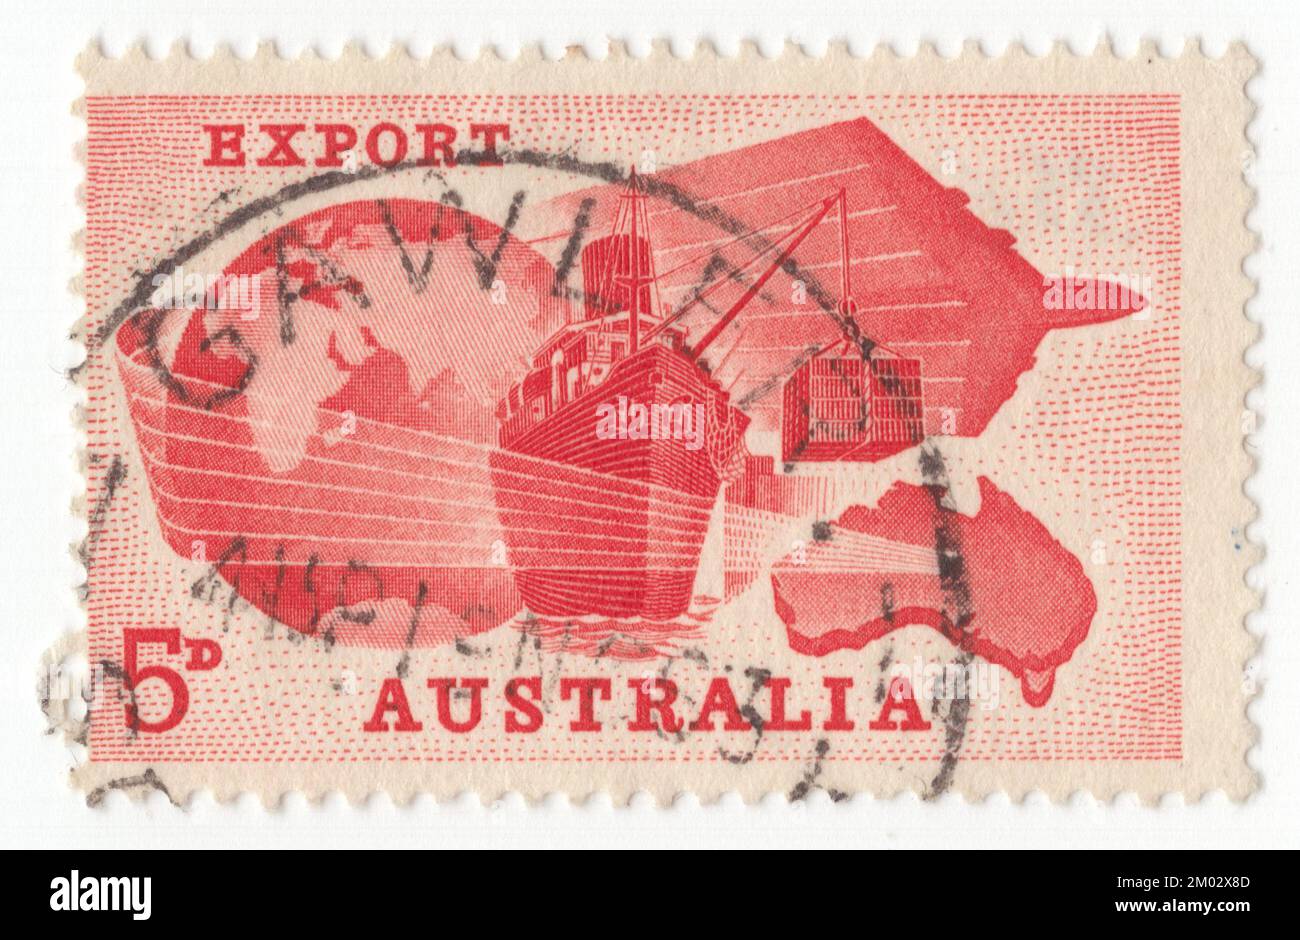 AUSTRALIA — 1963 August 28: An 5 pence red postage stamp depicting composition with Globe, Ship, Plane and Map of Australia. Importance of exports to Australian economy Stock Photo